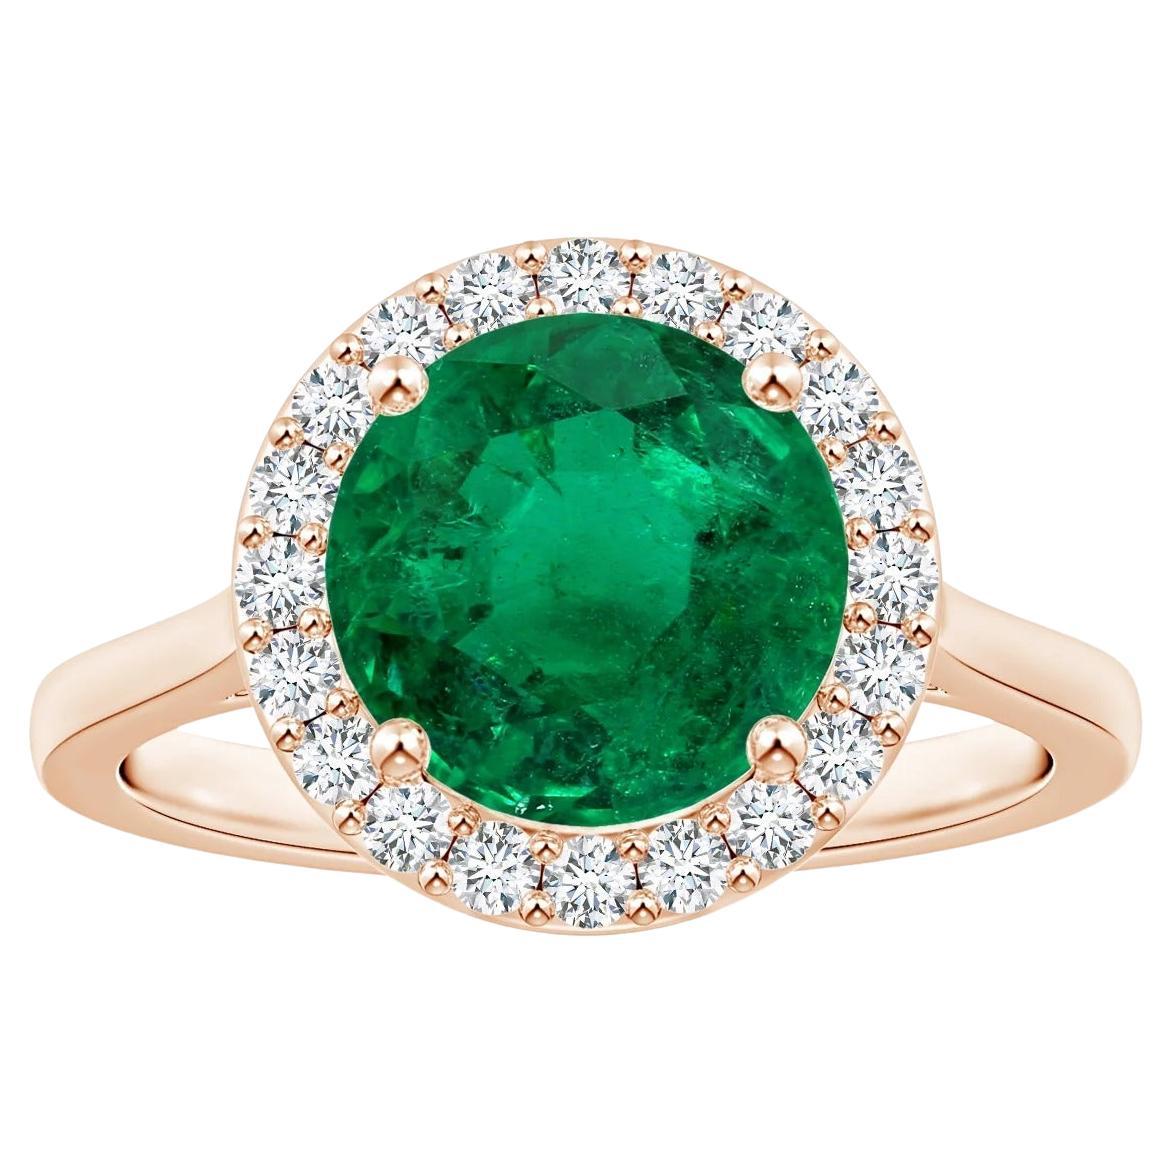 For Sale:  Angara Gia Certified Natural Round Emerald Ring in Rose Gold with Halo